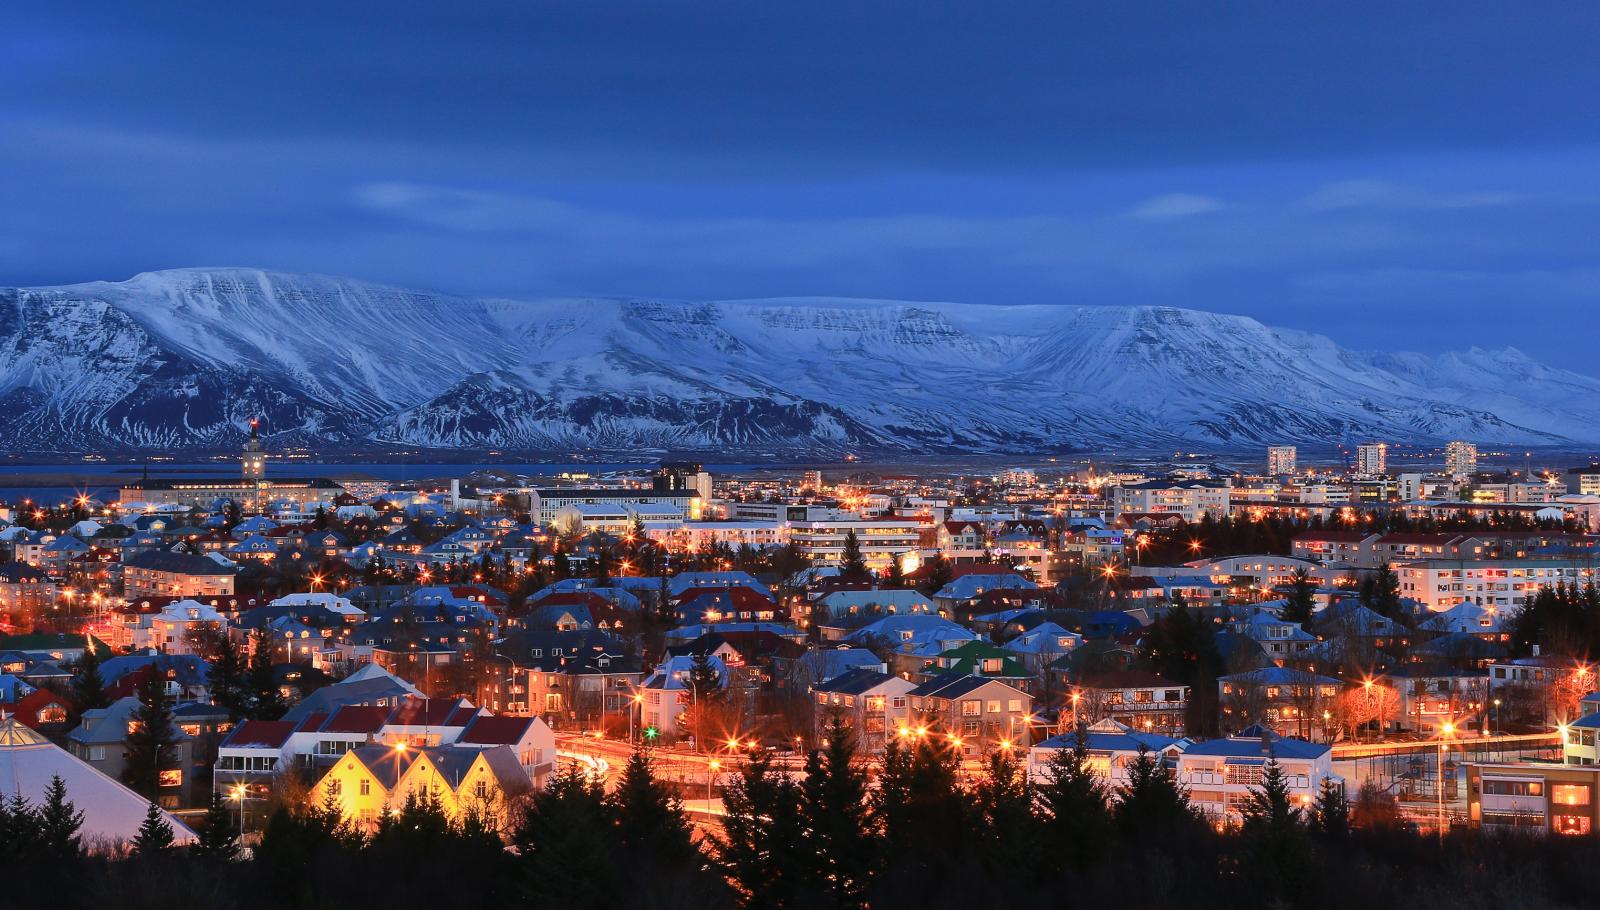 WORLD'S MOST ENERGY EFFICIENT CITY- All of the energy and heat used by the citizens of Reykjavik Iceland come from geothermal plants and renewable hydropower, making it the most sustainable and energy efficient city in the world. On their mission to be completely free of fossil fuels by 2050, the city has also been replacing traditional buses with hydrogen-fueled buses, from which the only emissions are water.